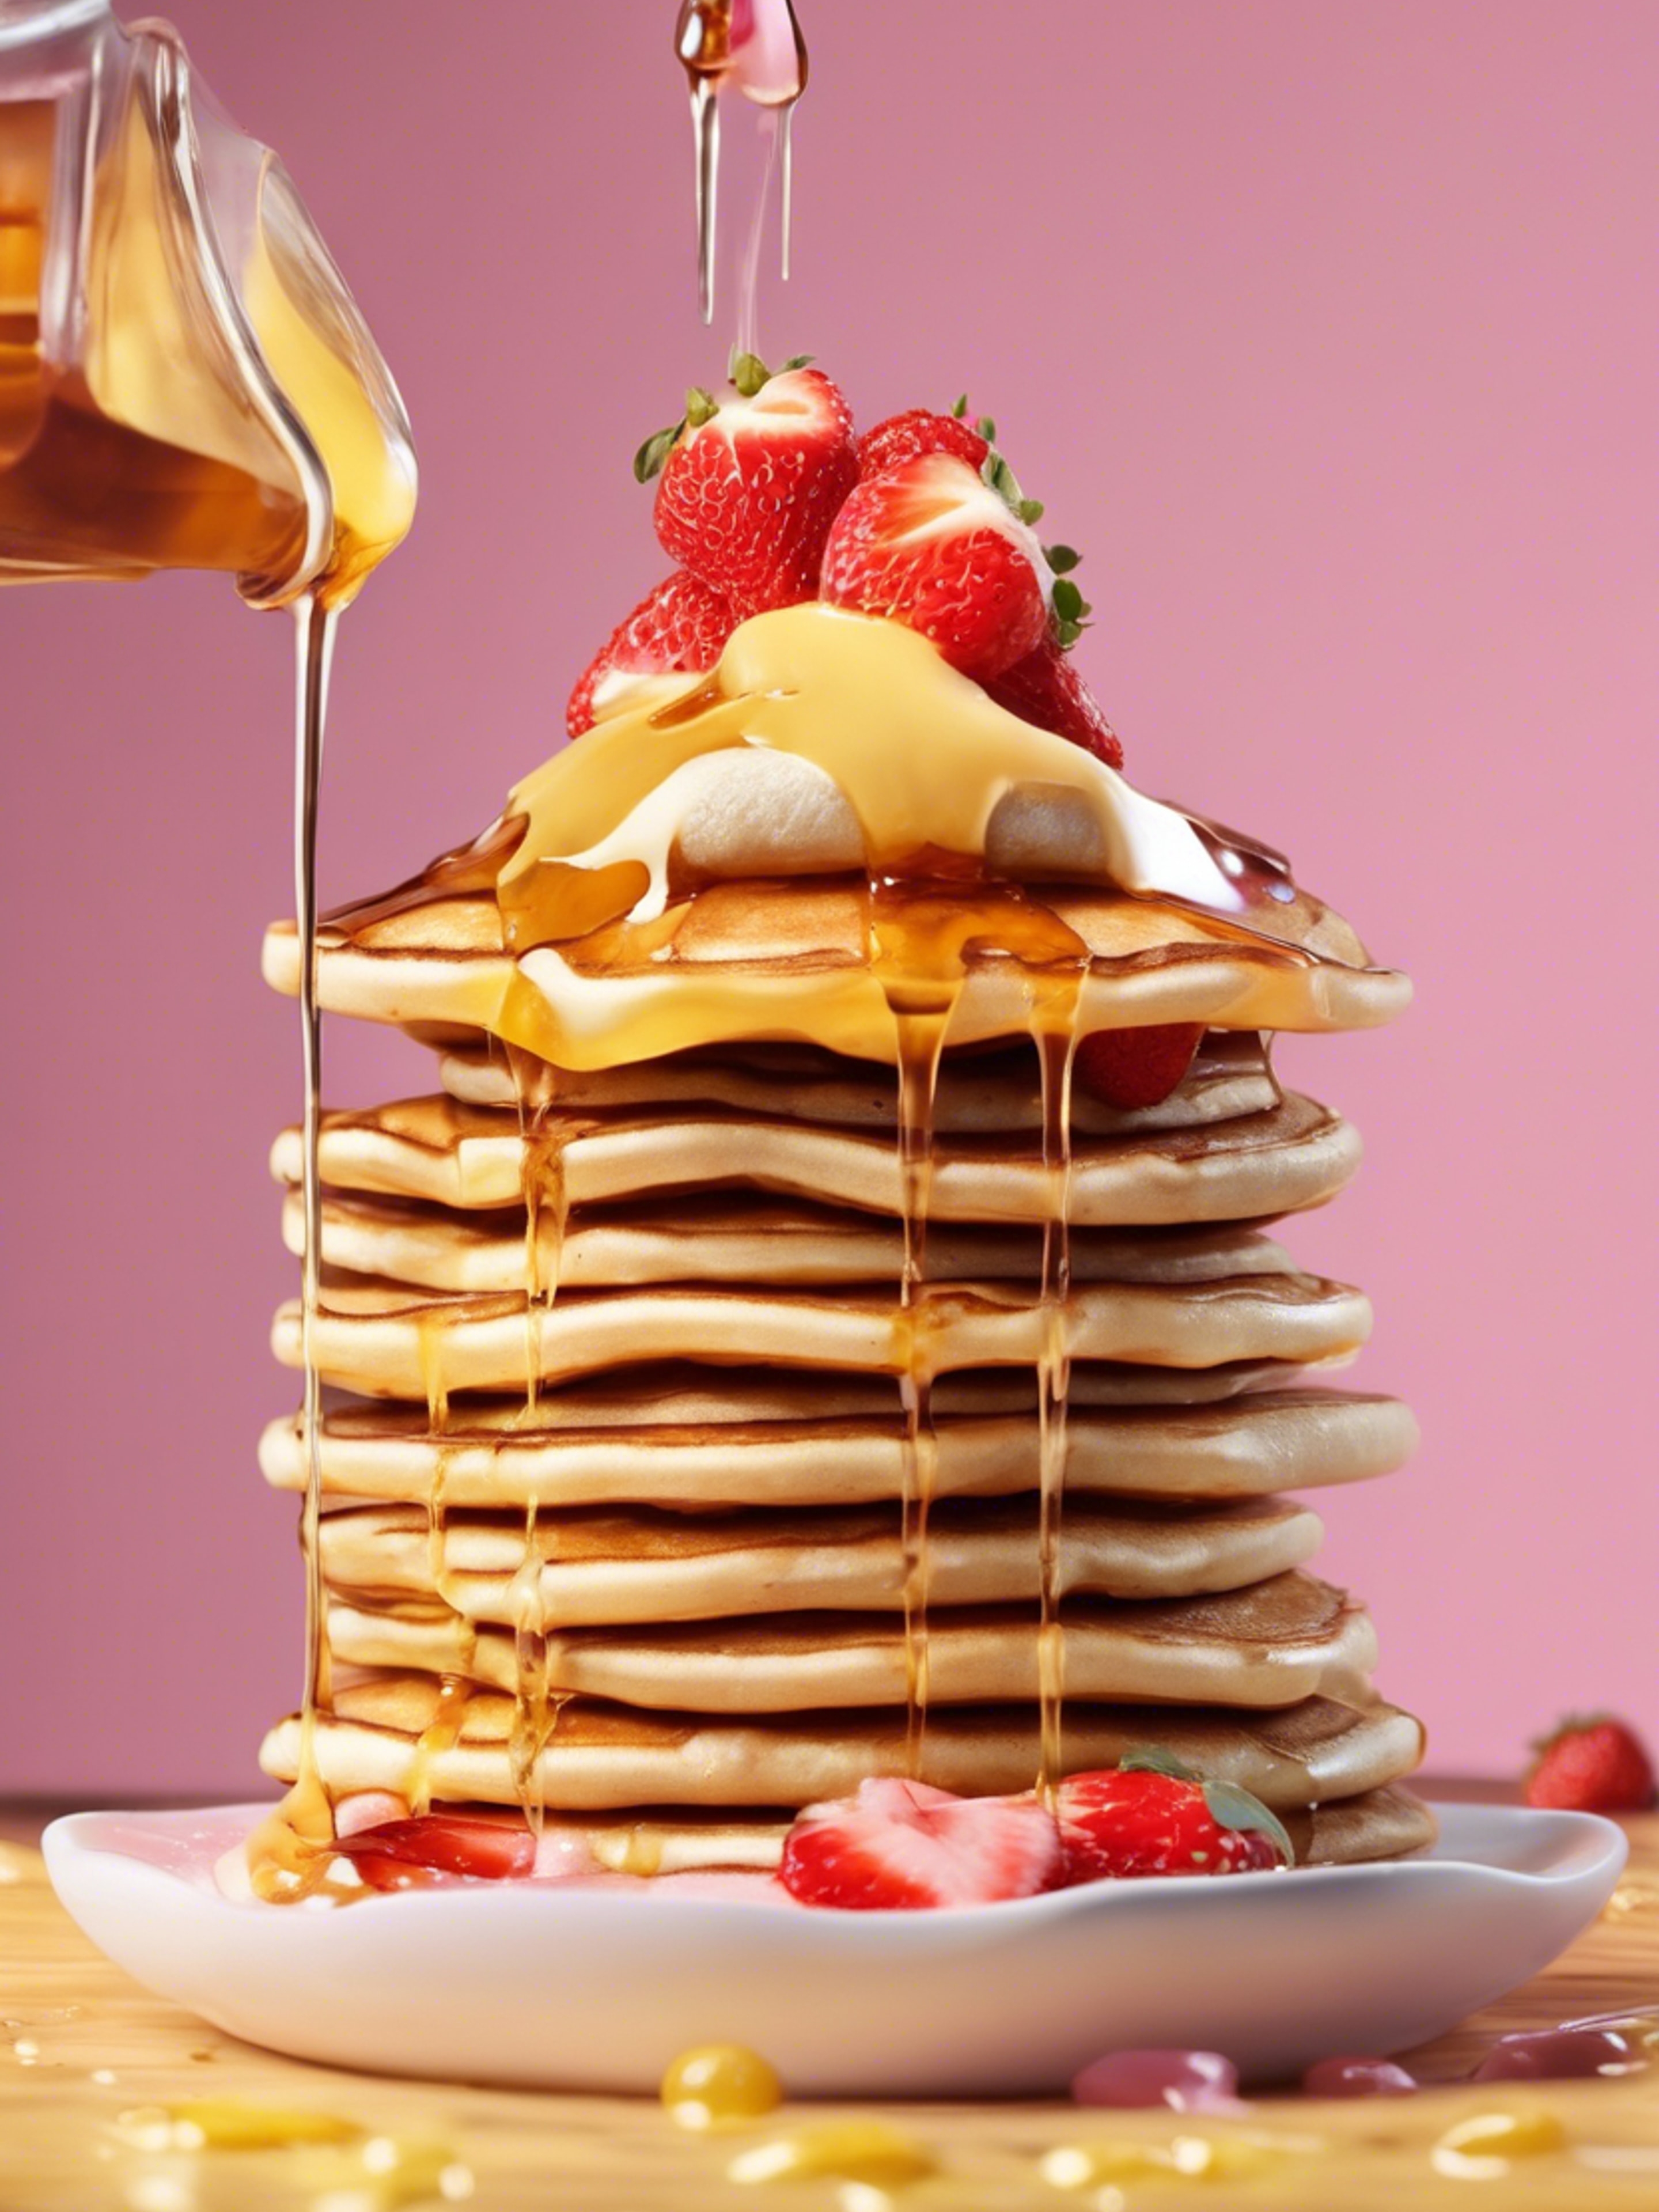 Beige kawaii pancakes stacked with a melted butter and syrup, topped with mini strawberry slices. Behang[6cf29e03a904430684e0]